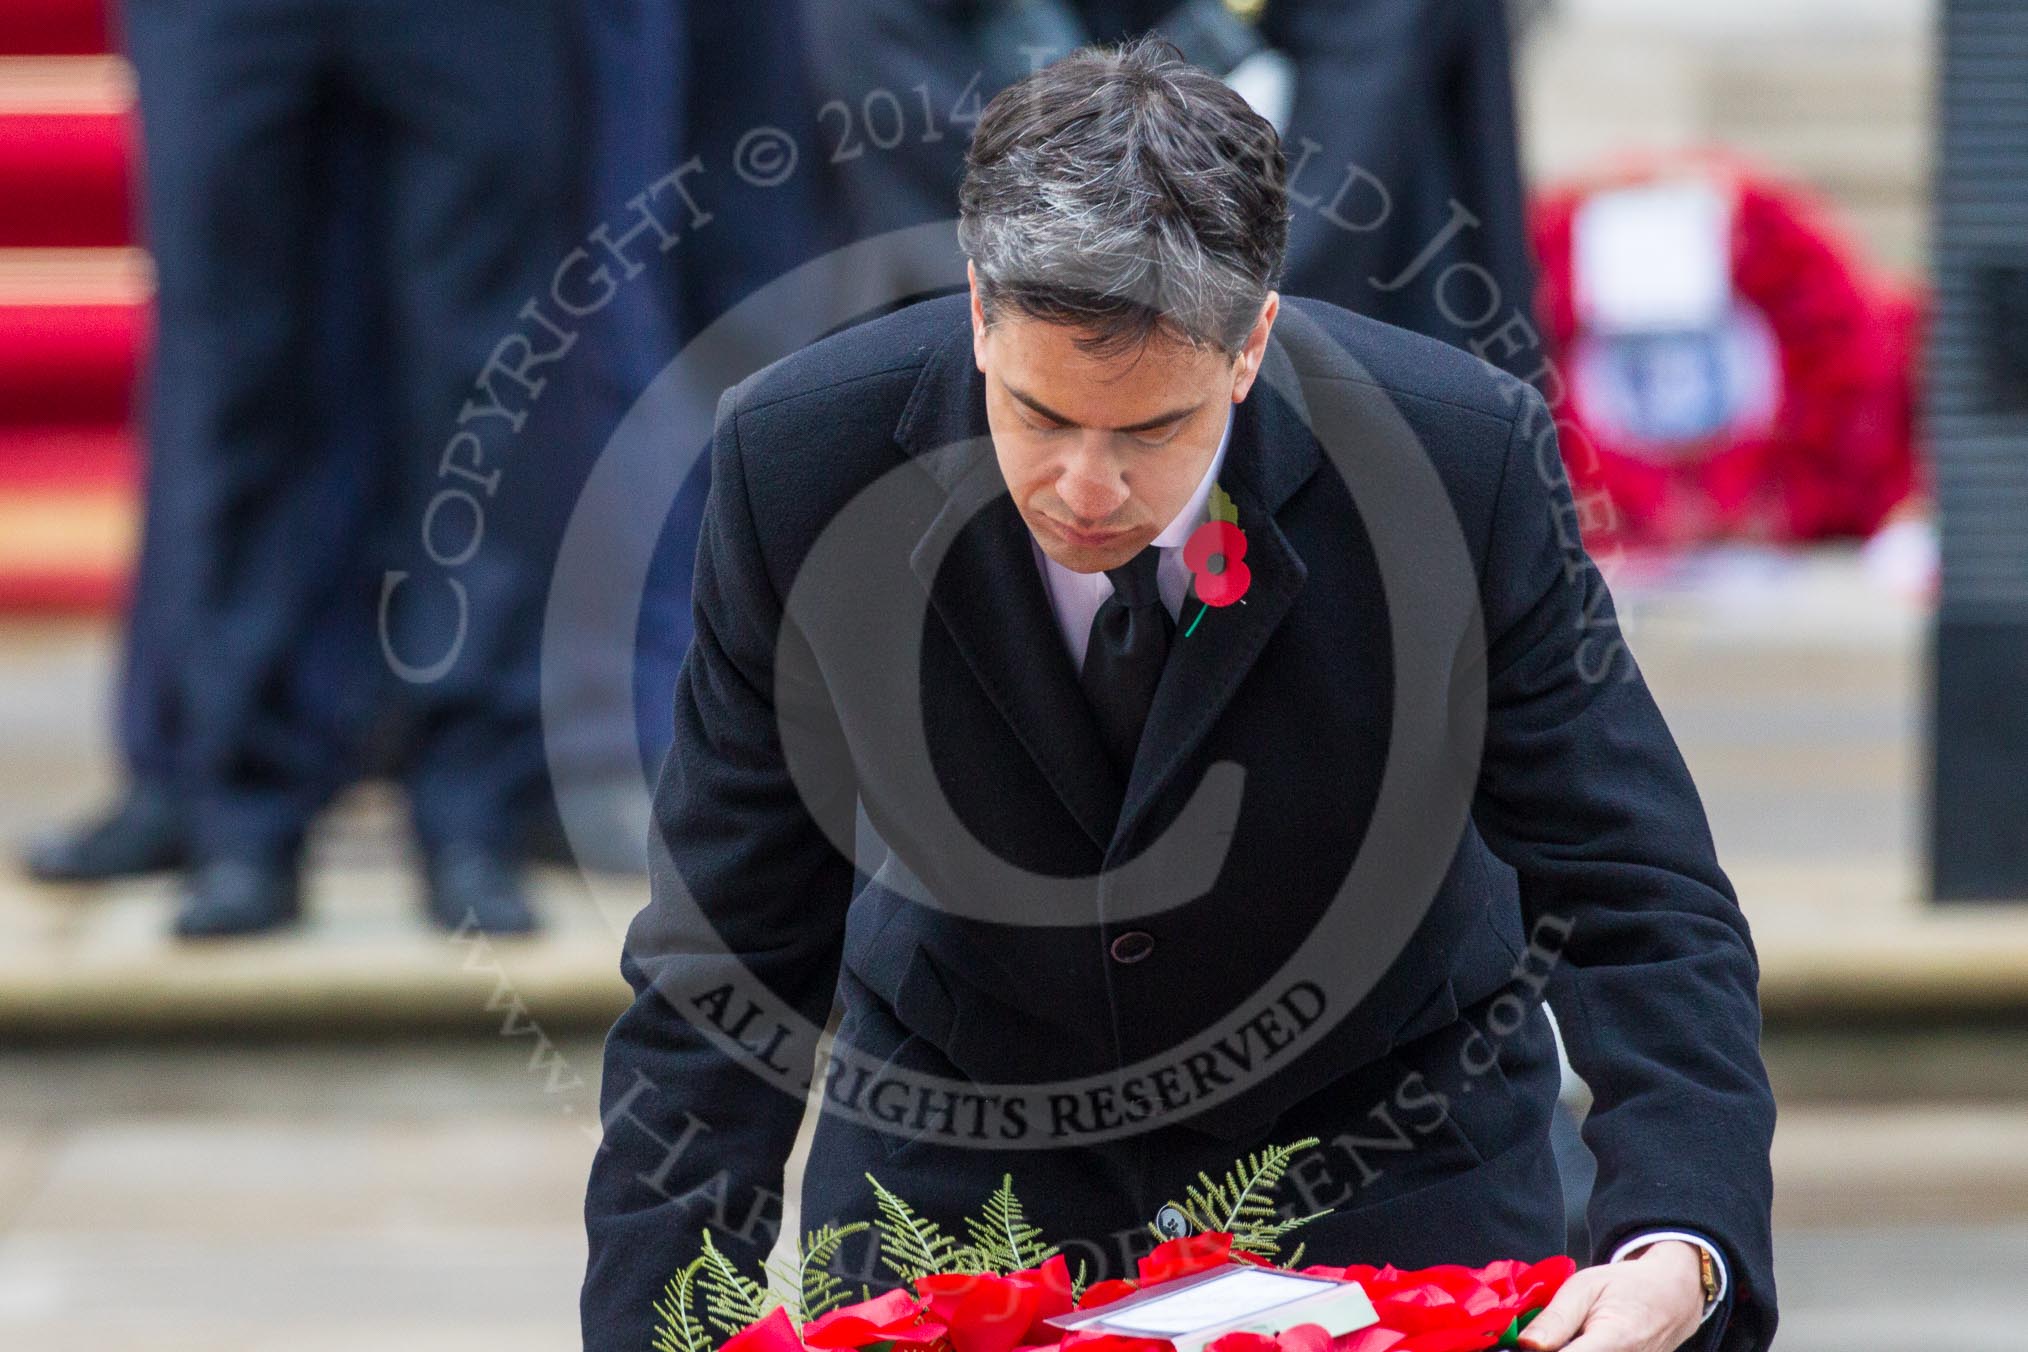 Remembrance Sunday at the Cenotaph in London 2014: Ed Miliband, the Leader of the Opposition, laying his wreath at the Cenotaph.
Press stand opposite the Foreign Office building, Whitehall, London SW1,
London,
Greater London,
United Kingdom,
on 09 November 2014 at 11:08, image #227